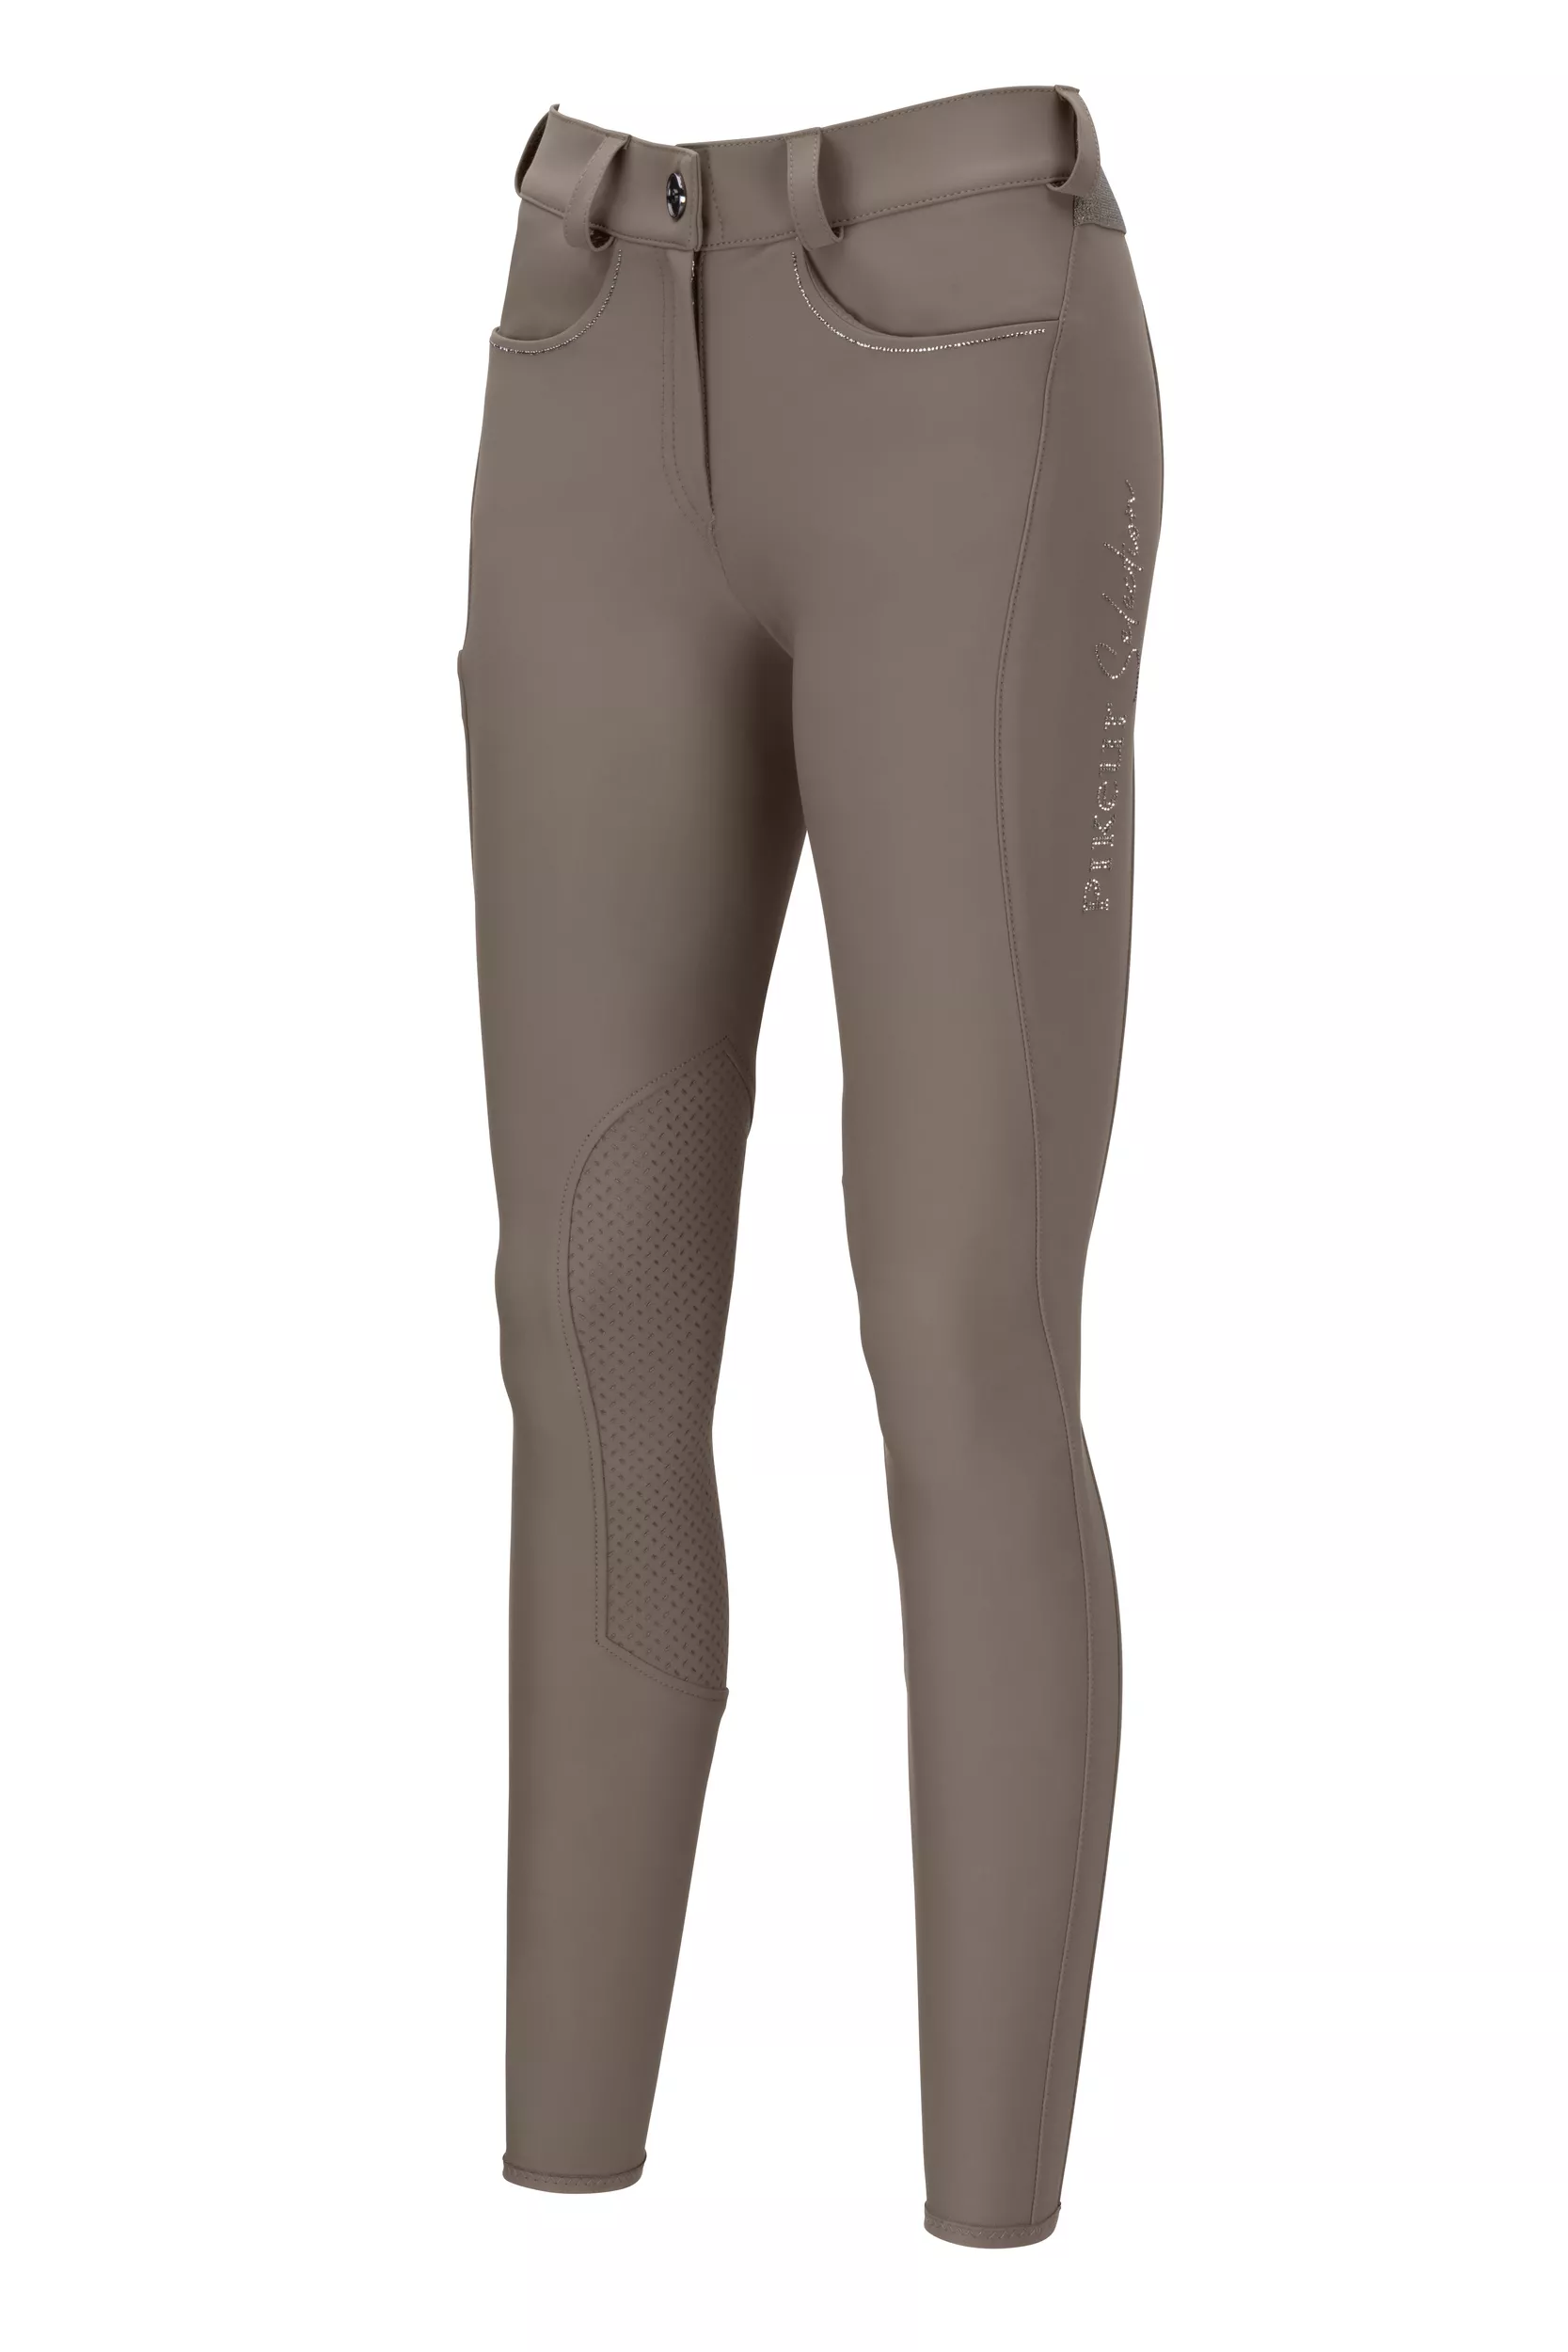 Riding breeches NIA SELECTION, GRIP, knee patches, taupe